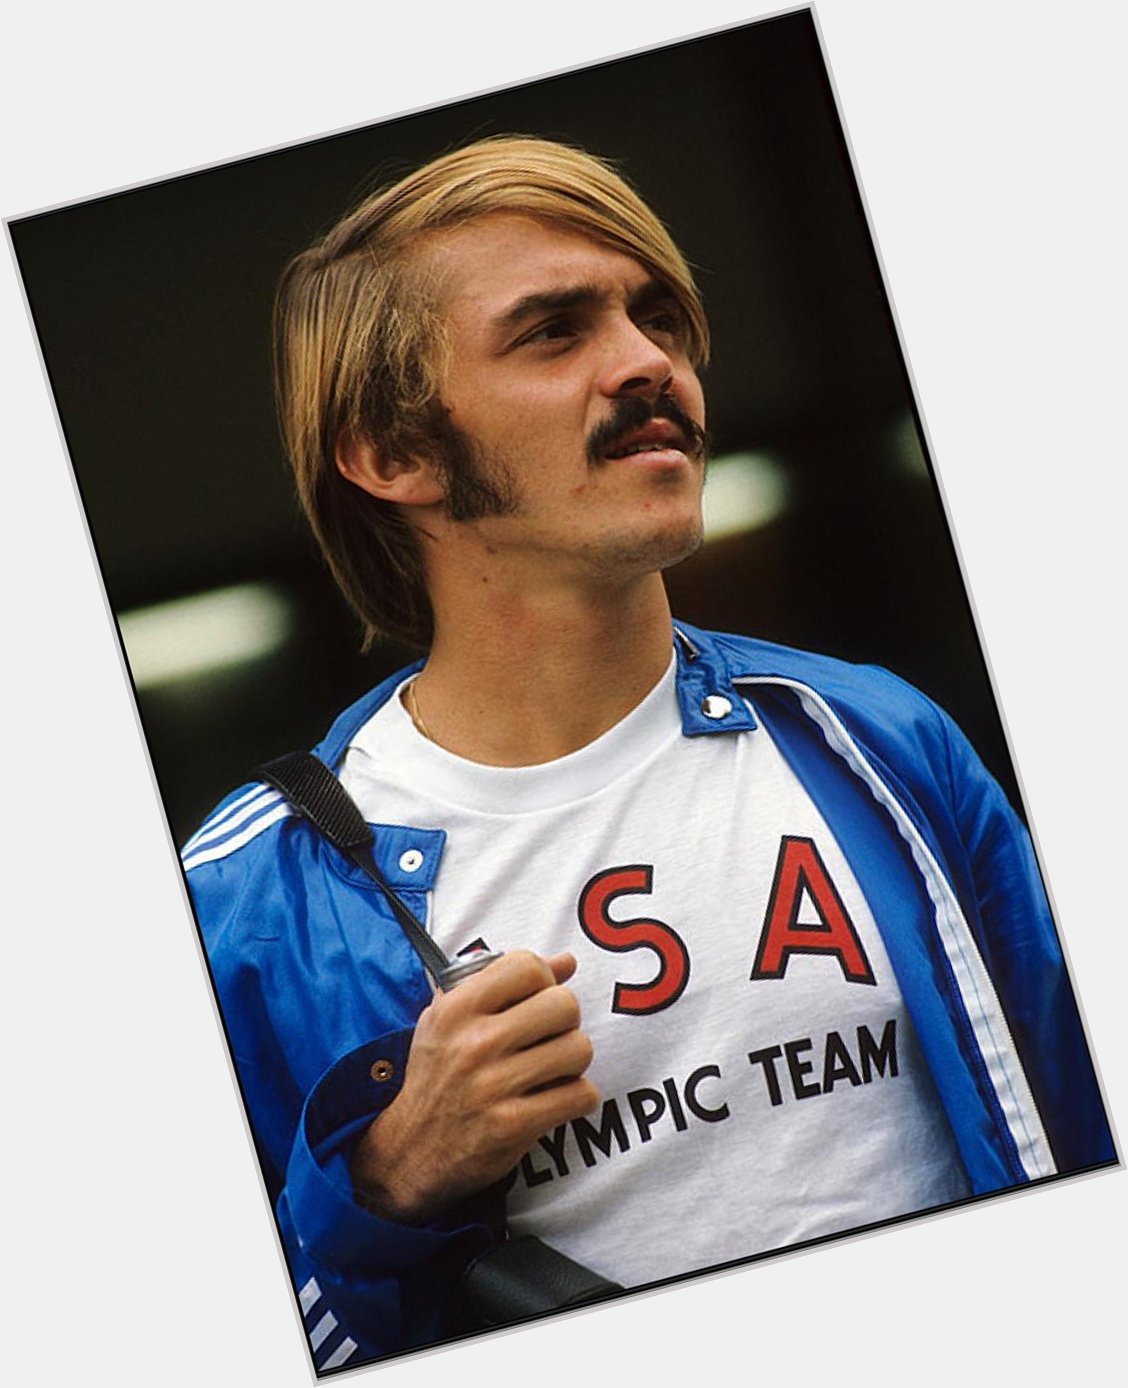 Almost forgot to wish the OG track stud Steve Prefontaine a happy birthday today! also my dad. happy birthday dad. 